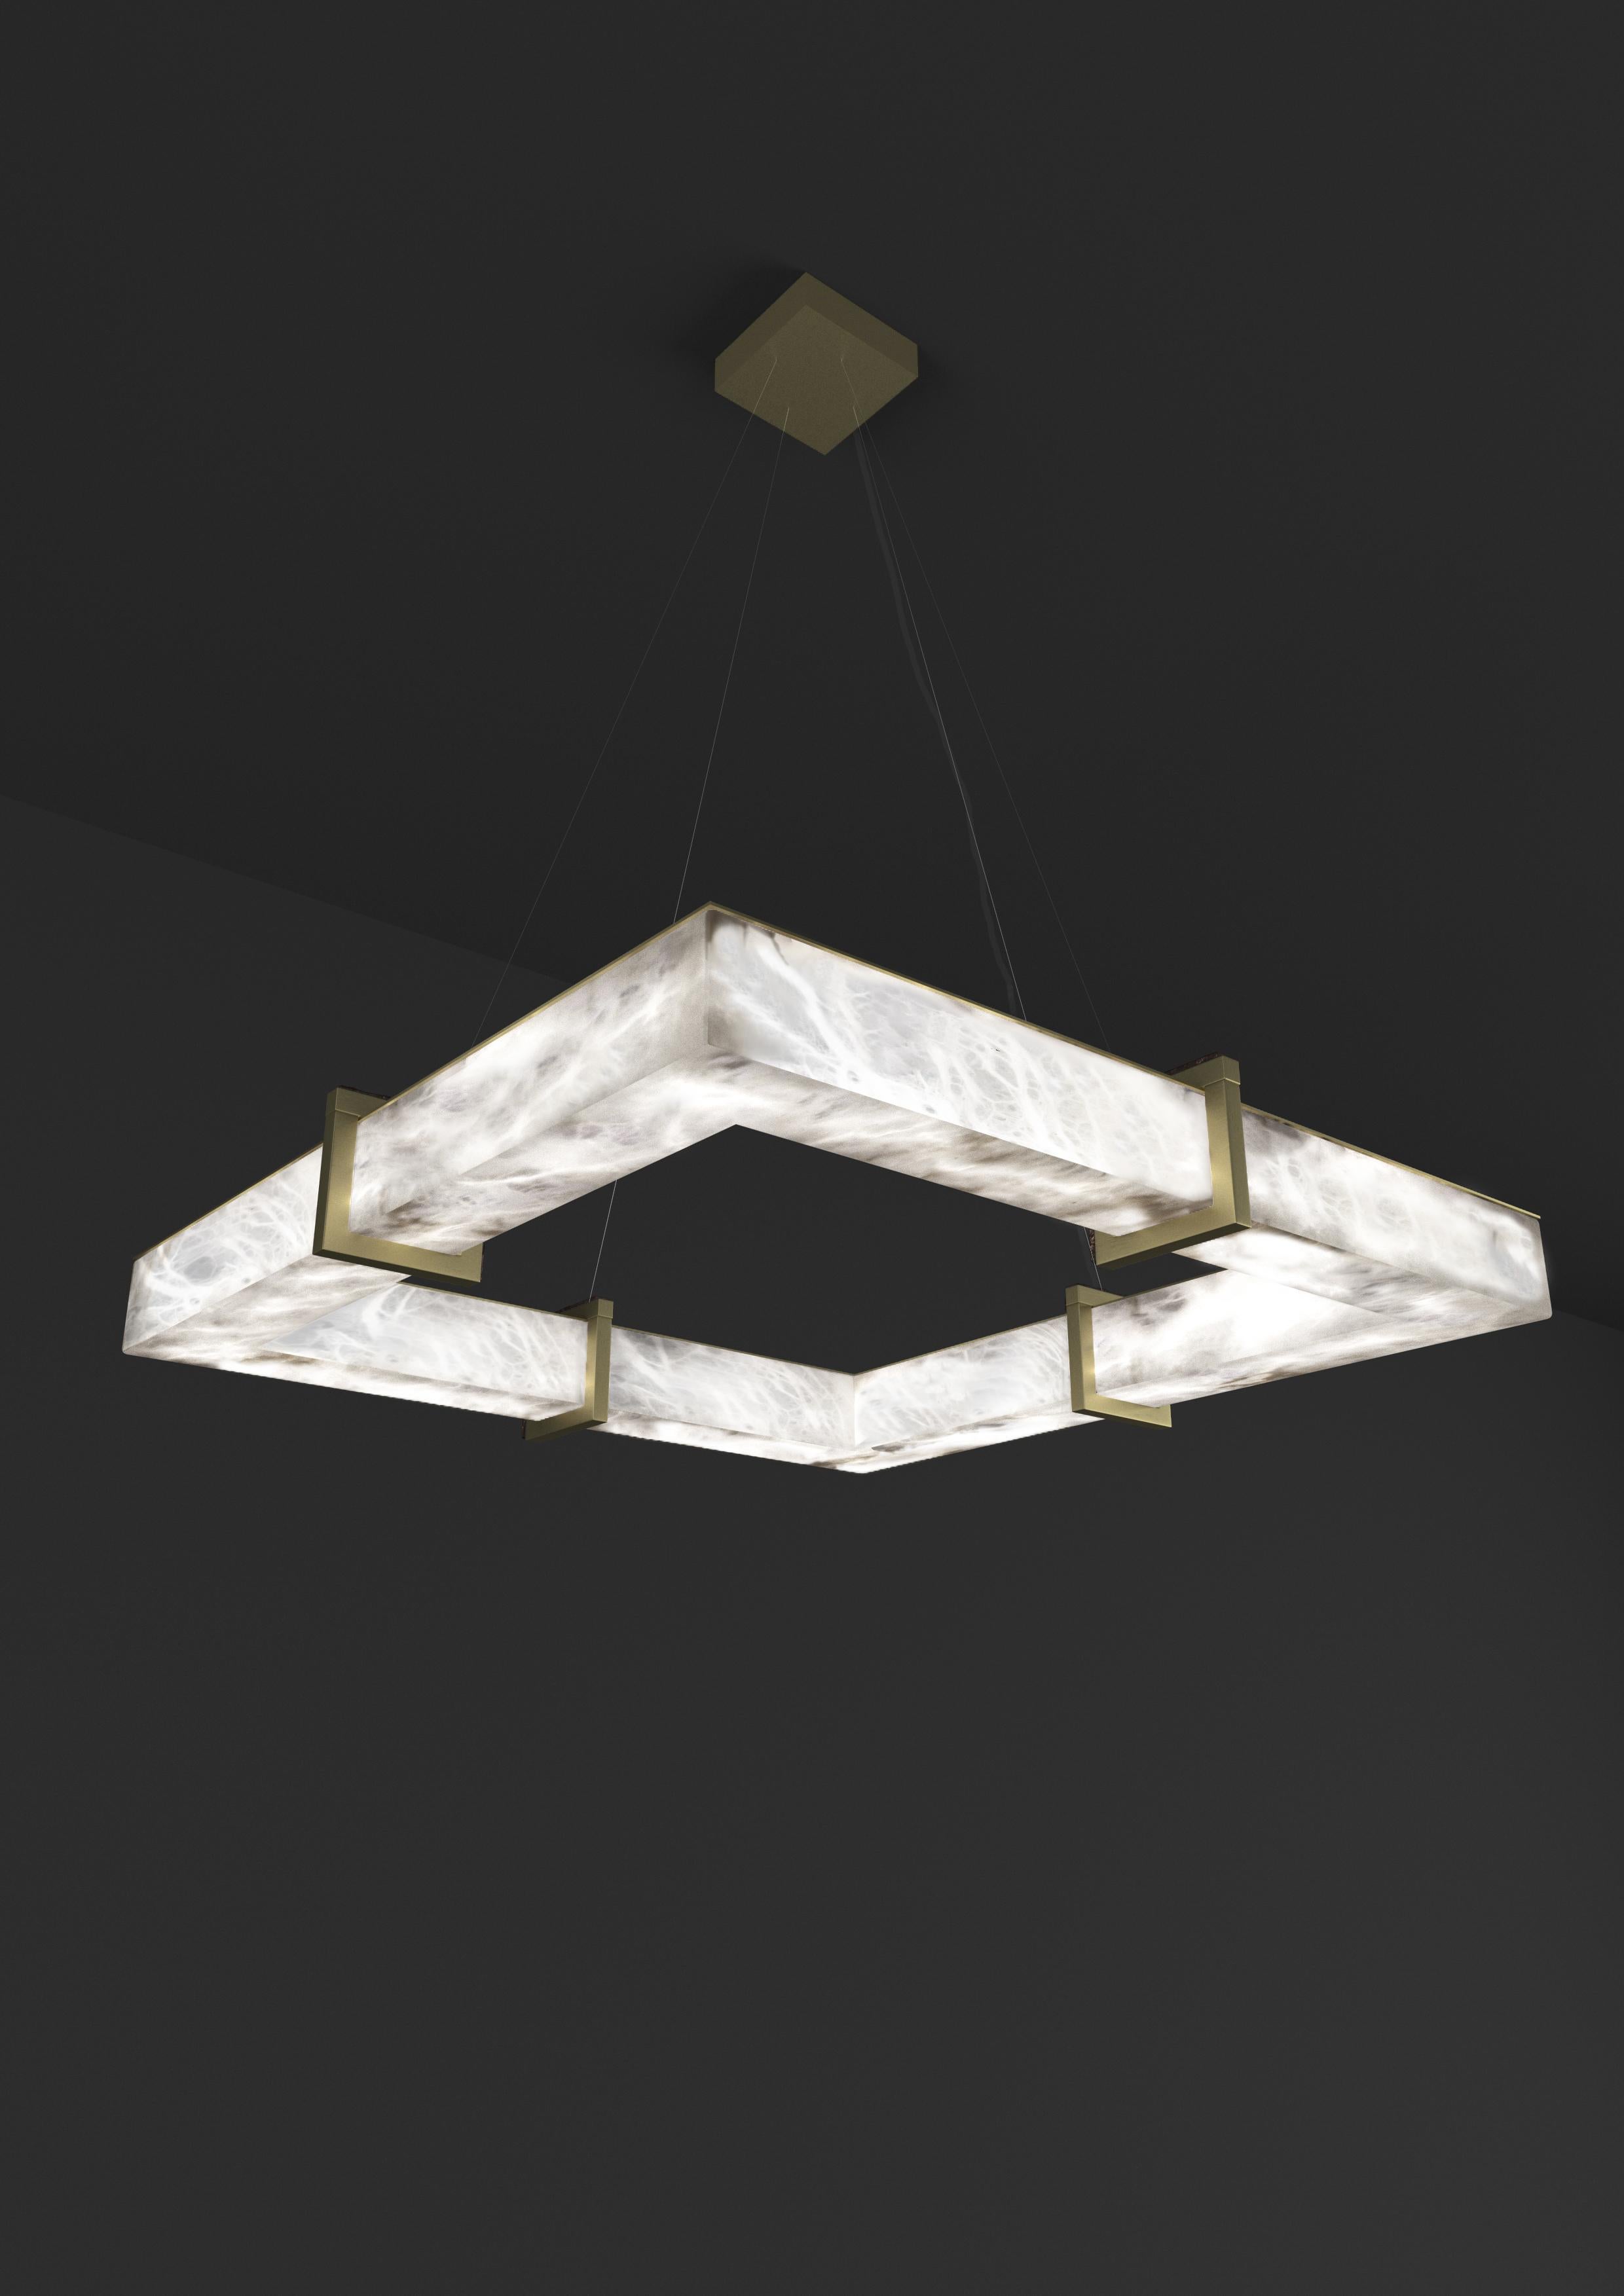 Talassa Brushed Brass Pendant Lamp by Alabastro Italiano
Dimensions: D 80 x W 80 x H 11 cm.
Materials: White alabaster and brass.

Available in different finishes: Shiny Silver, Bronze, Brushed Brass, Ruggine of Florence, Brushed Burnished, Shiny